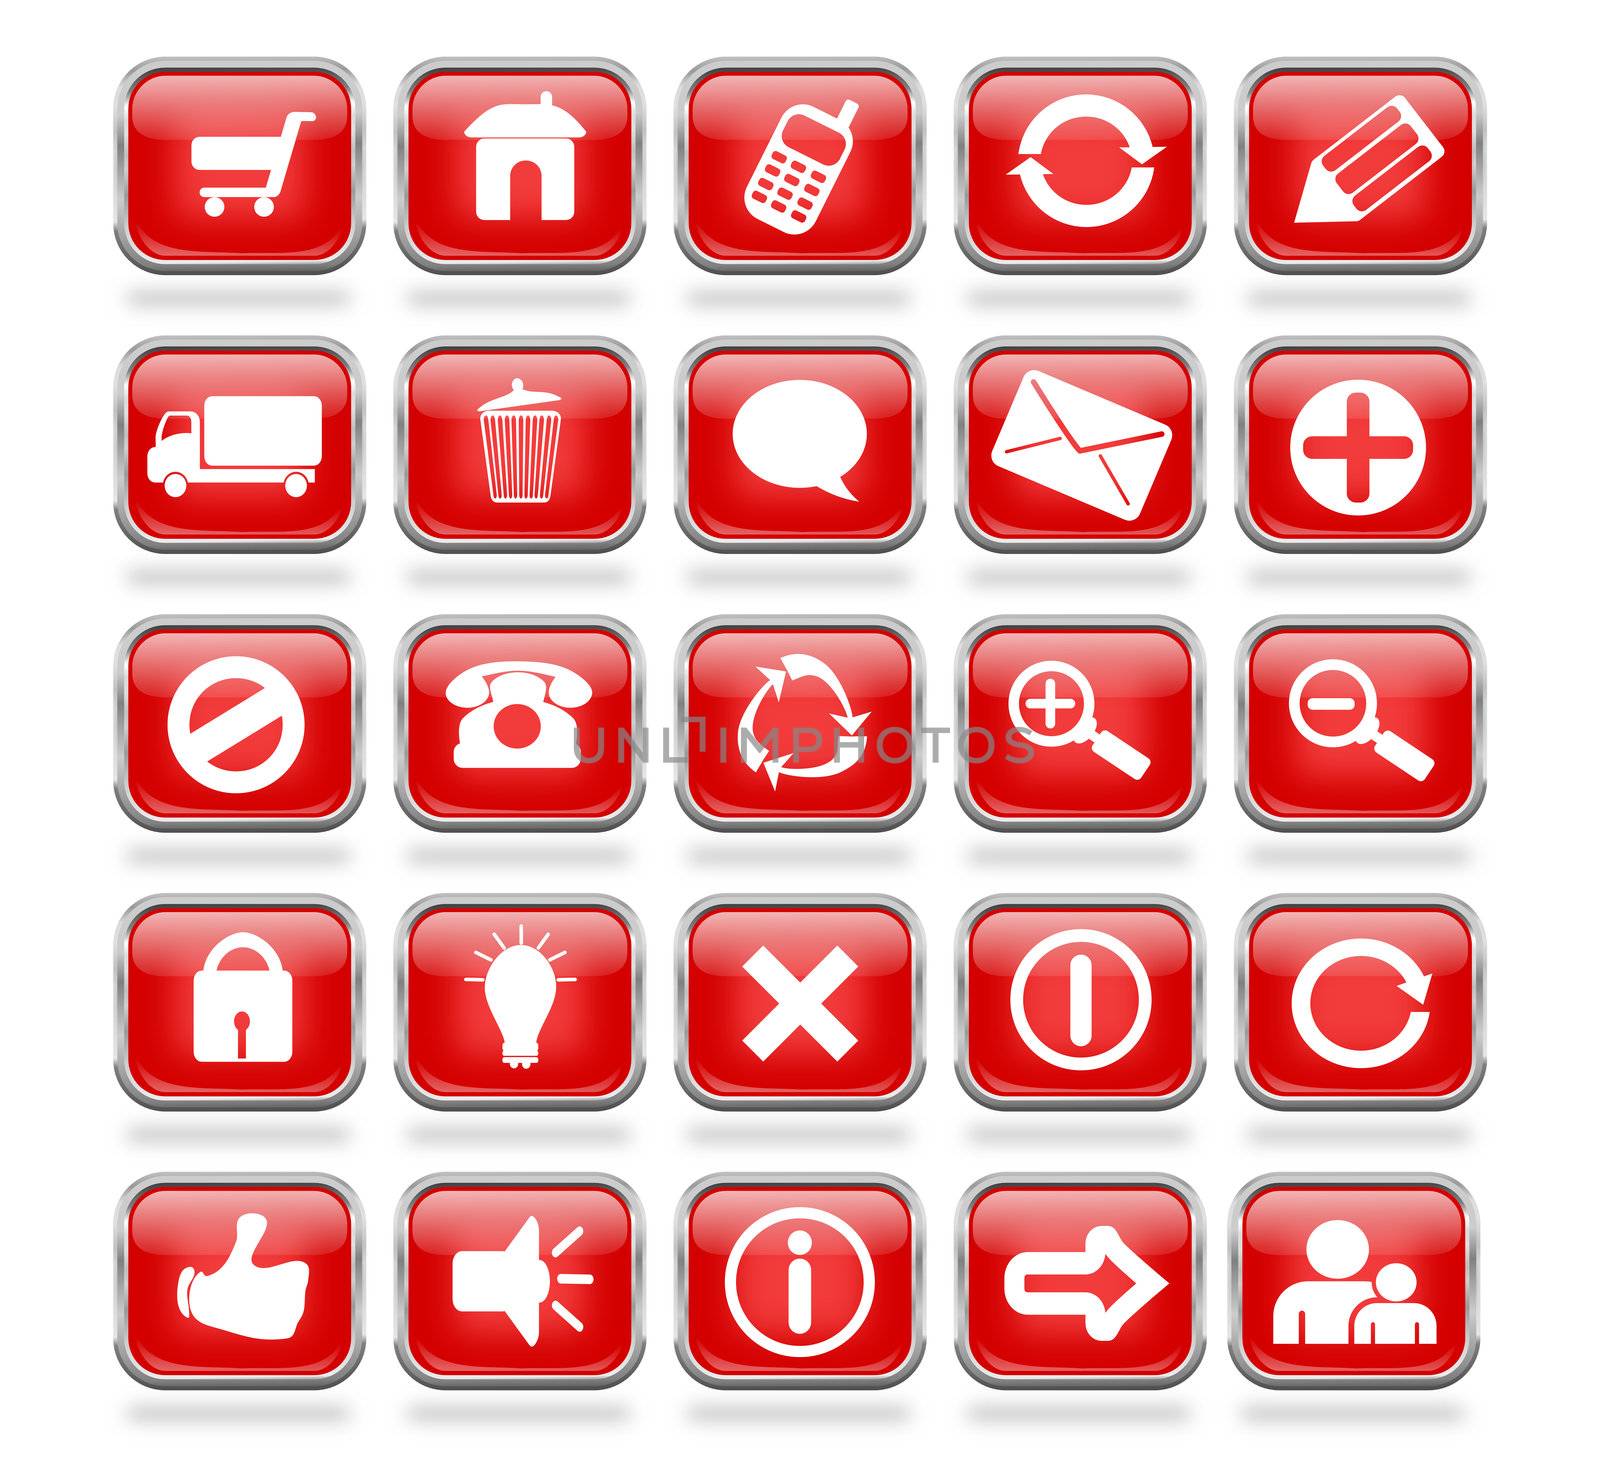 A collection of 25 red shiny metallic web icon buttons